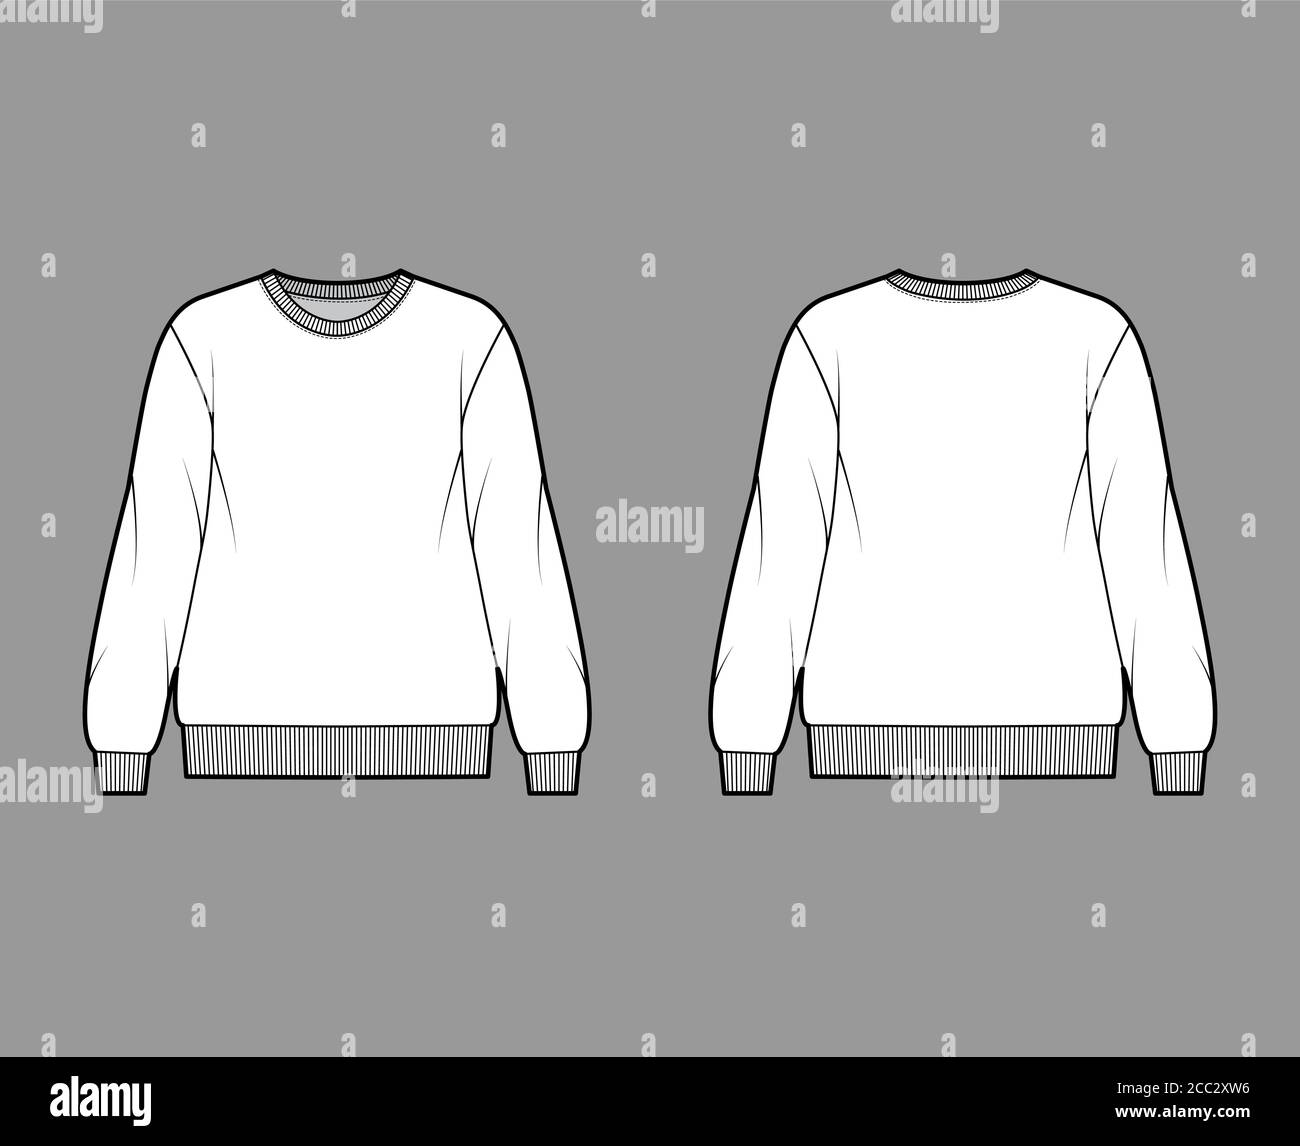 Cotton-terry oversized sweatshirt technical fashion illustration with relaxed fit, crew neckline, long sleeves. Flat outwear jumper apparel template front, back white color. Women, men, unisex top CAD Stock Vector